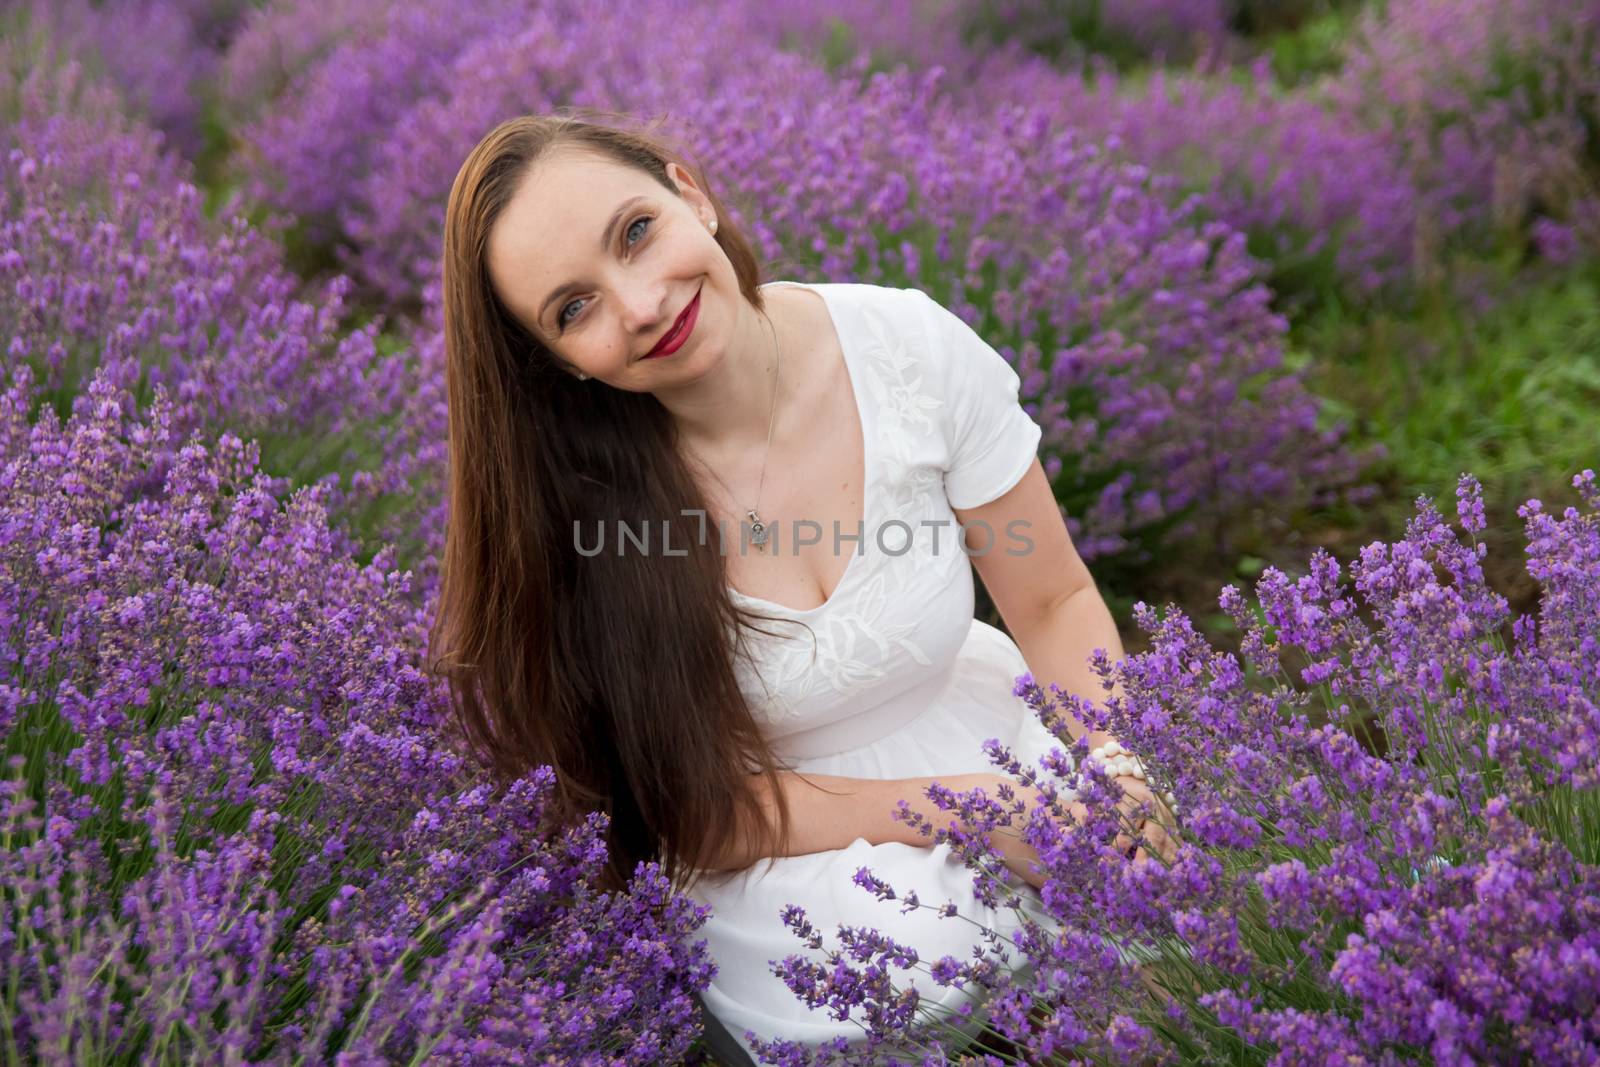 Smiling woman among lavender field by Angel_a